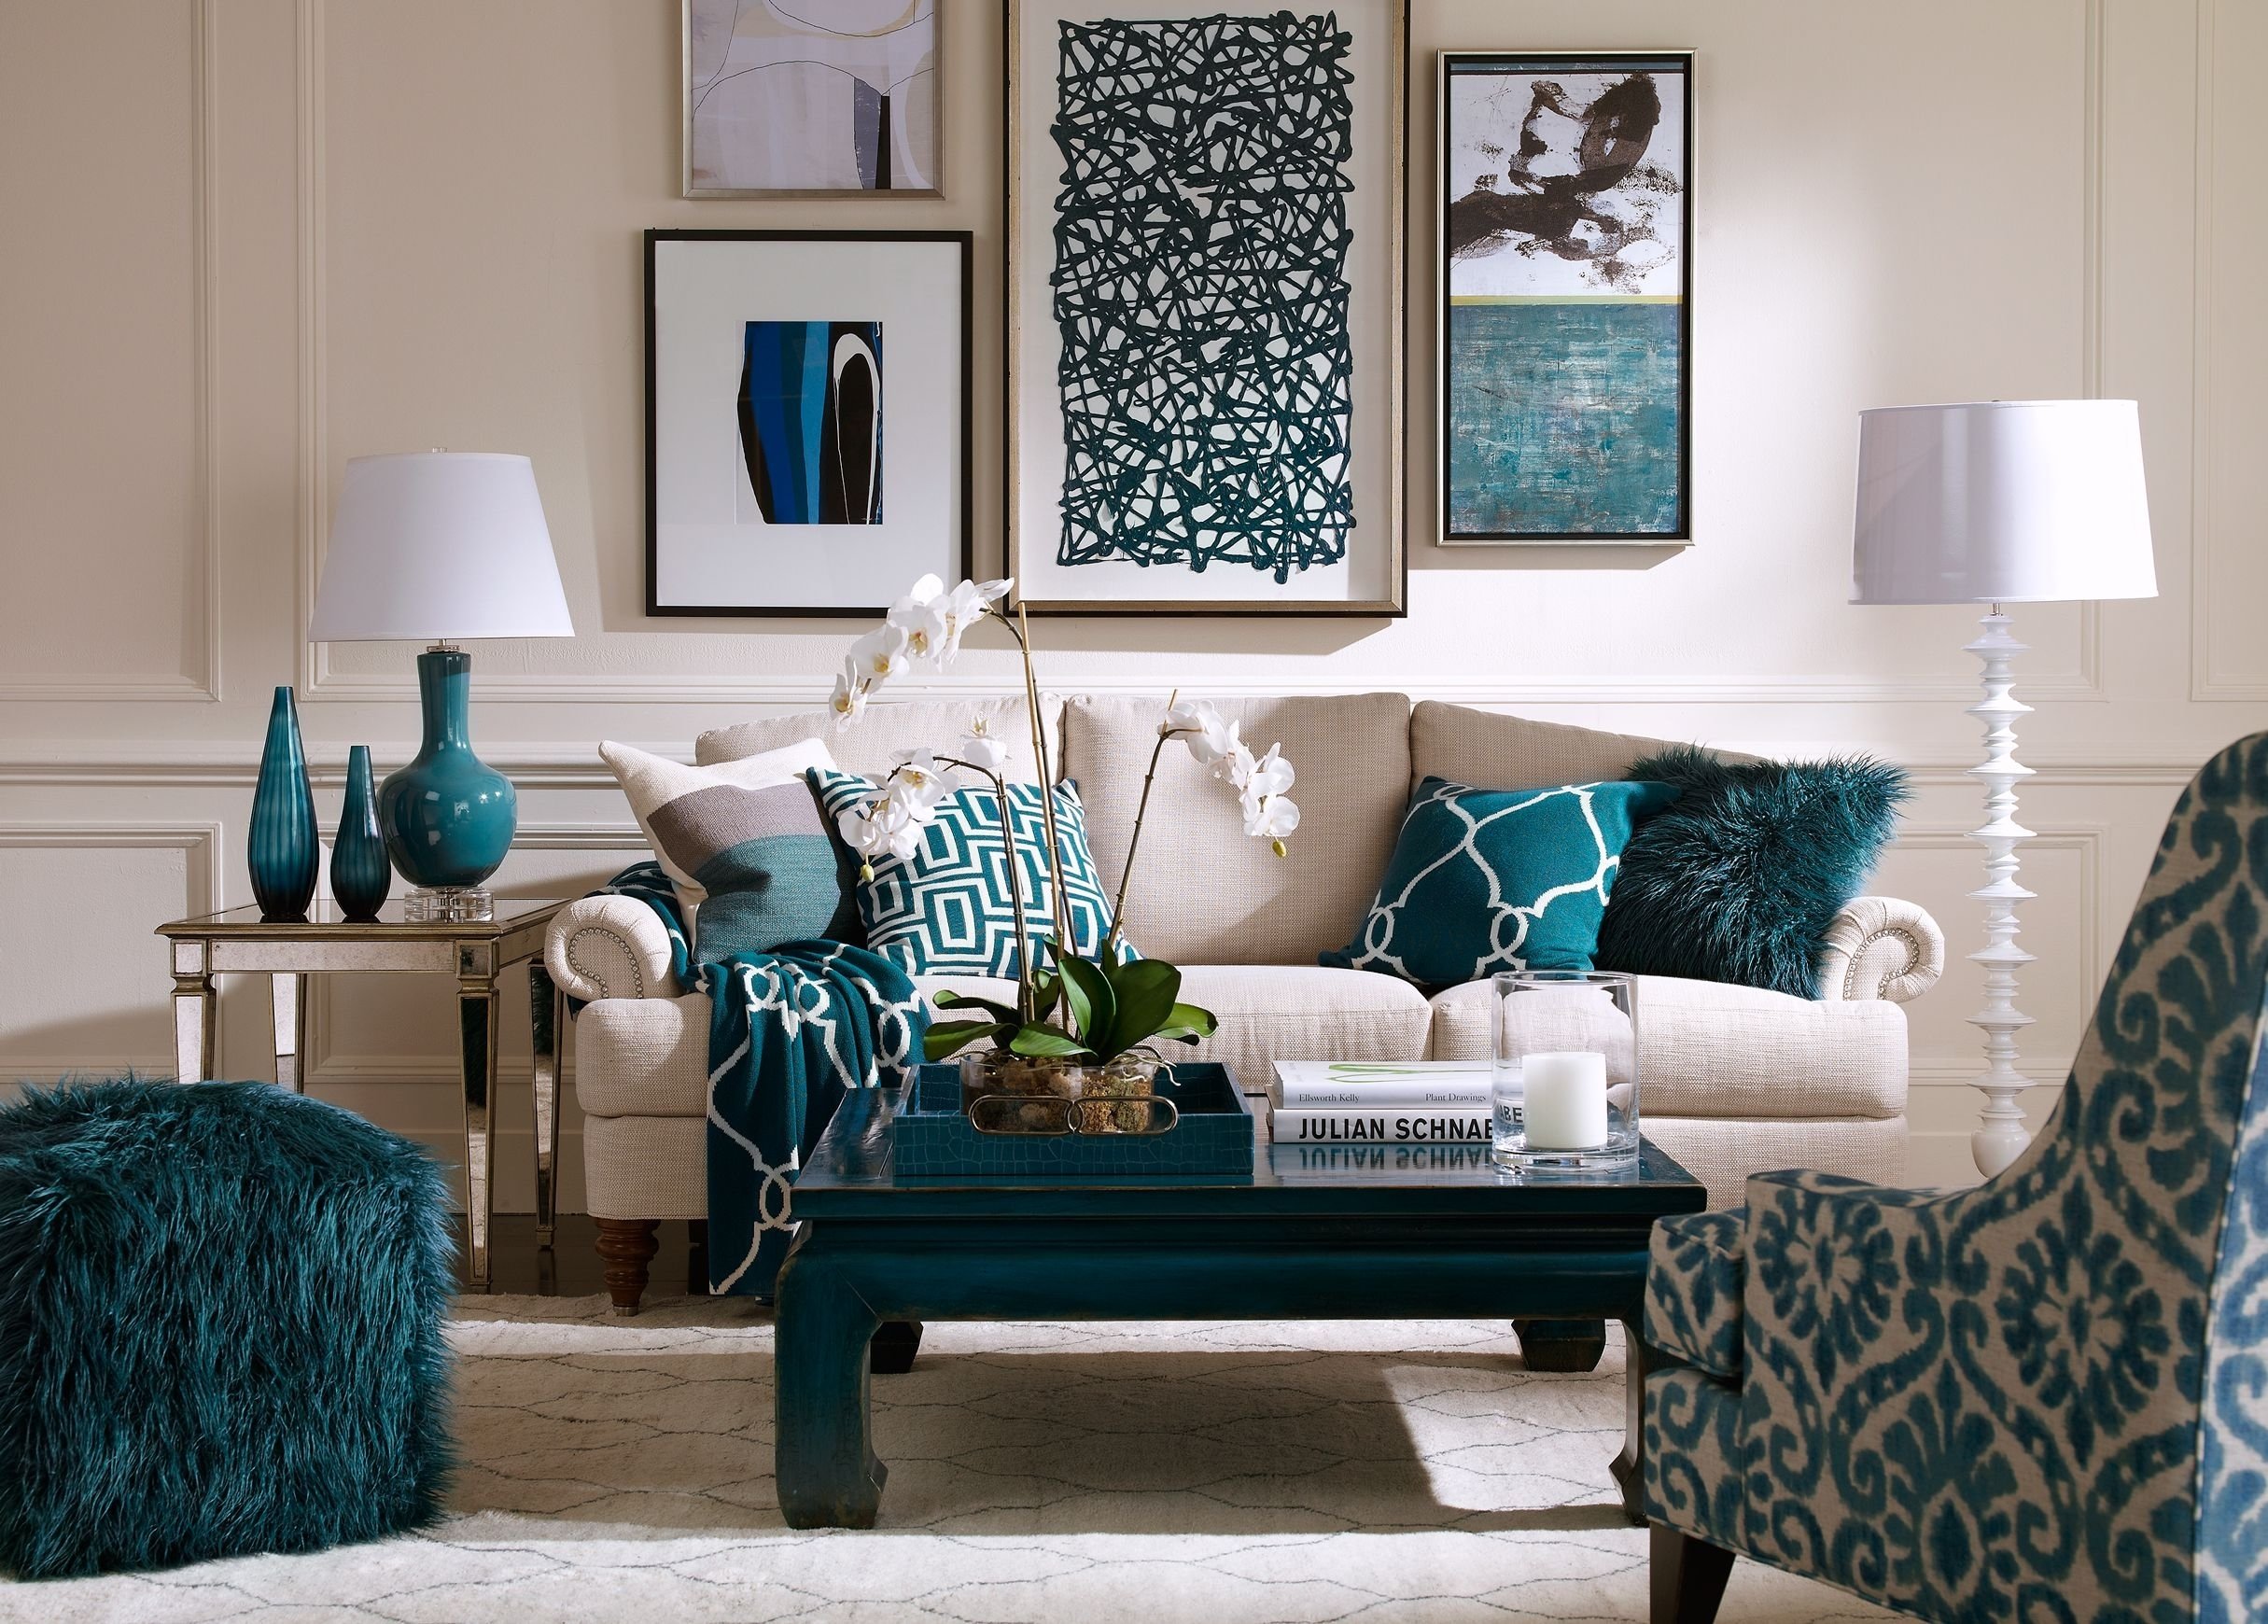 10 Unique Ideas For Decorating Living Room 15 best images about turquoise room decorations living rooms 2 2022